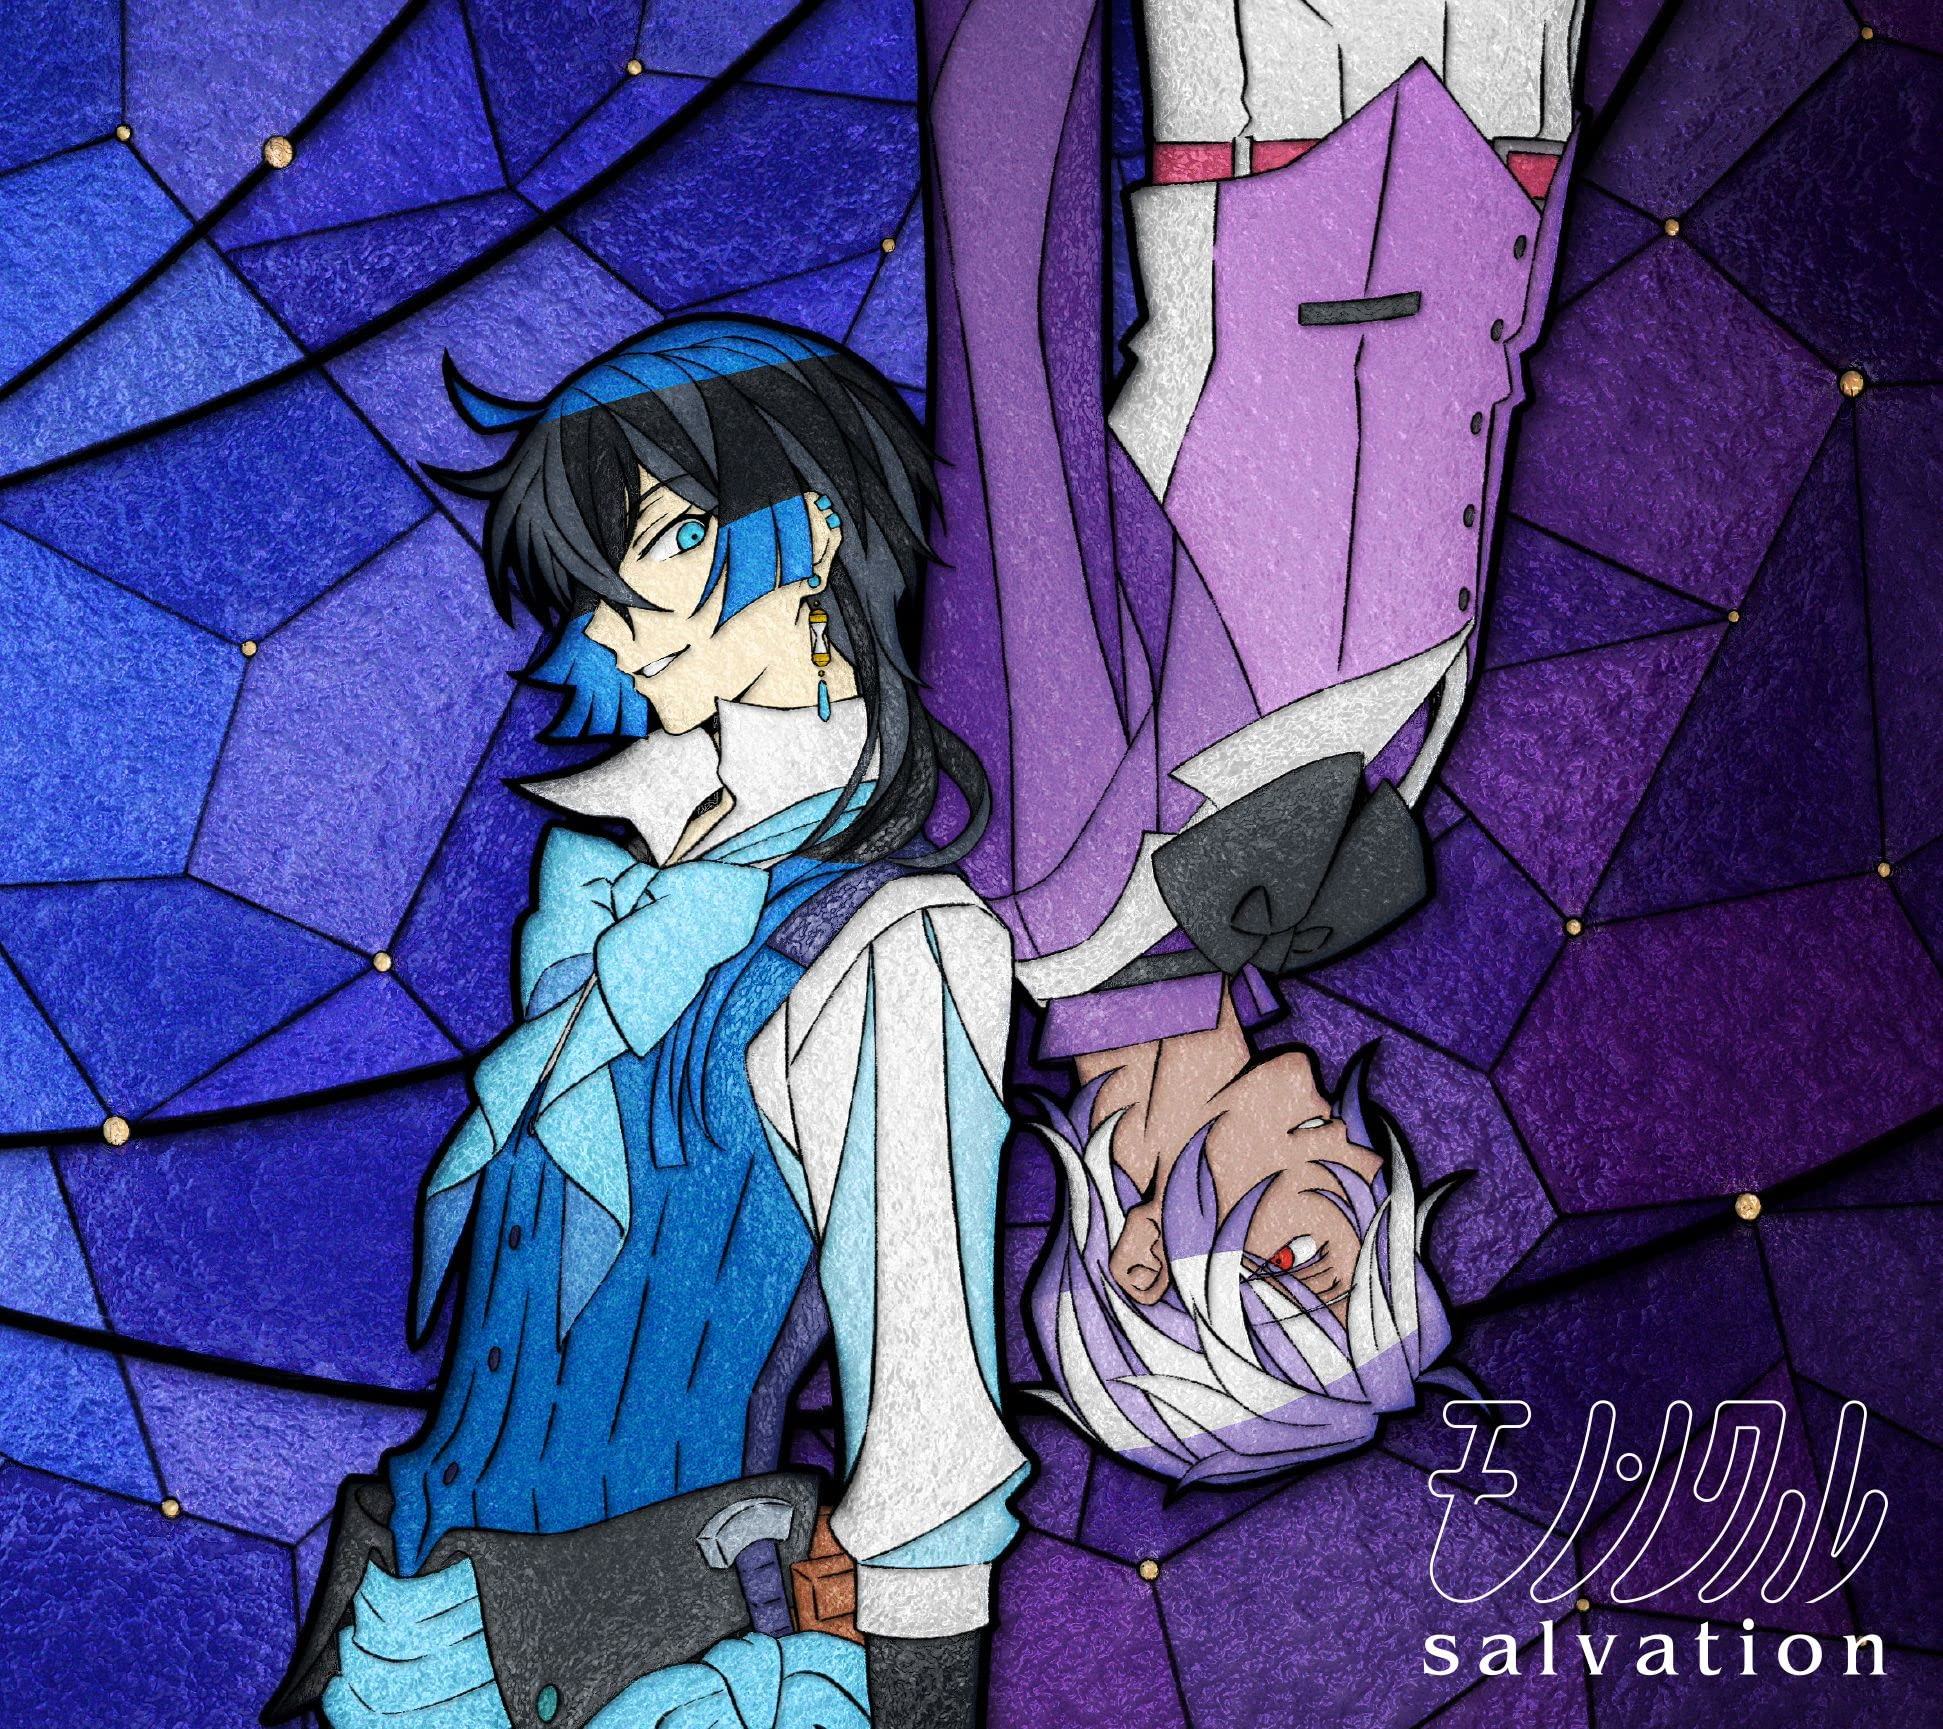 The Case Study of Vanitas ep.6 - Salvation? I drink and watch anime